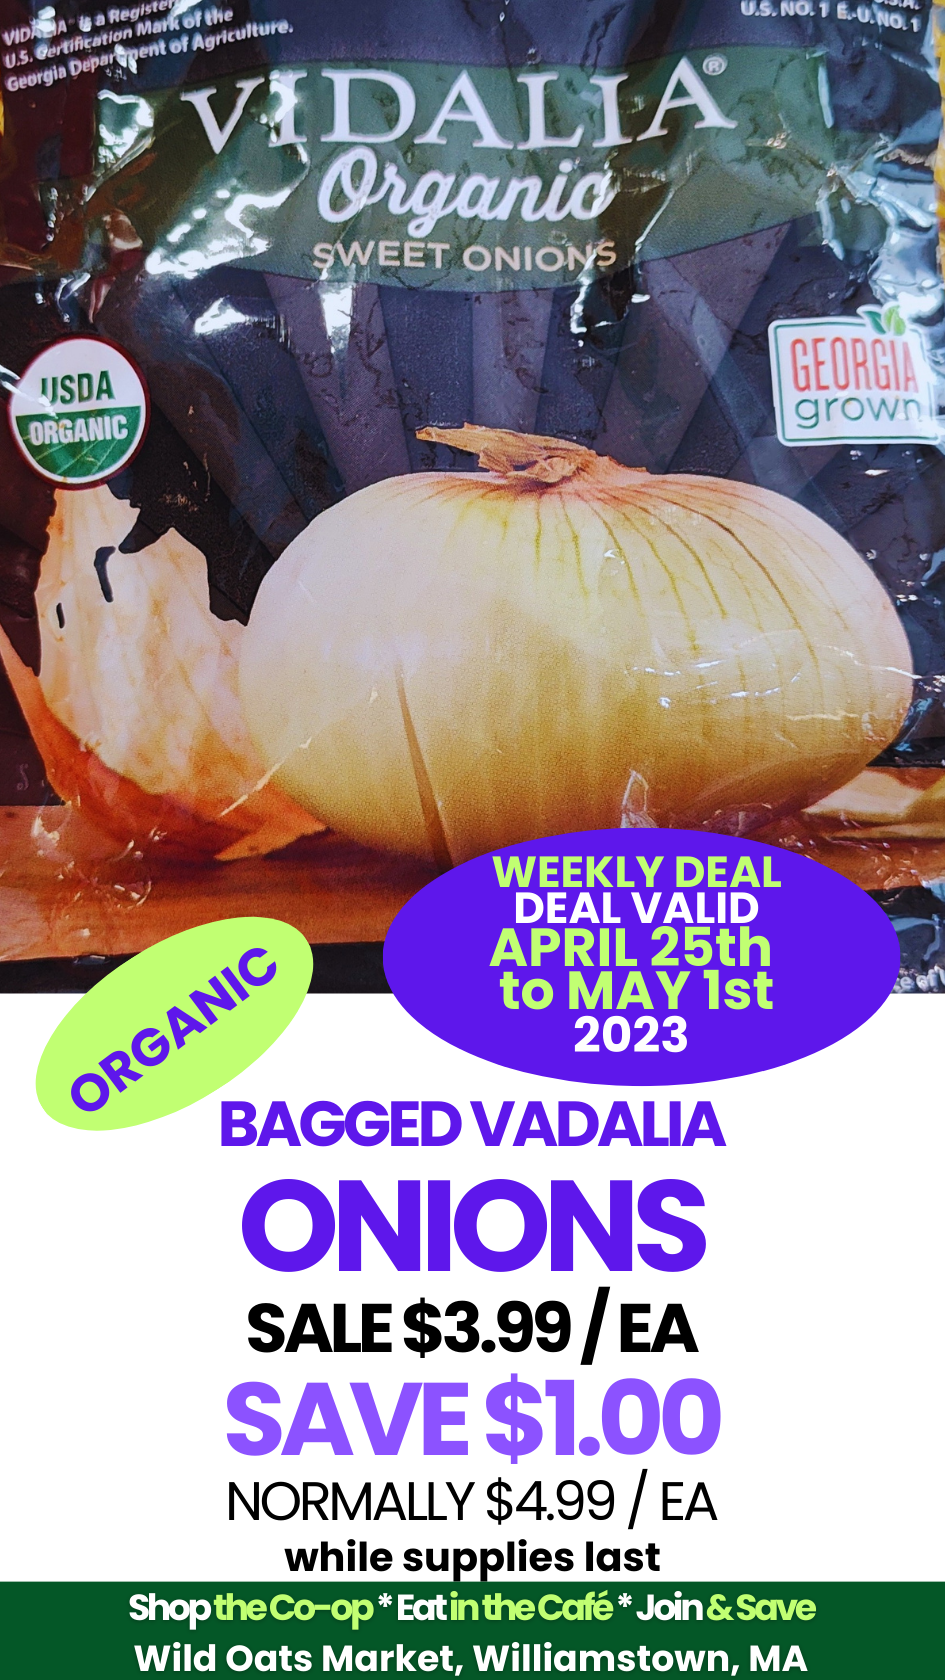 Wild Oats Market Weekly Update APR 28 to MAY ORGANIC BAGGED VADALIA ONIONS.png